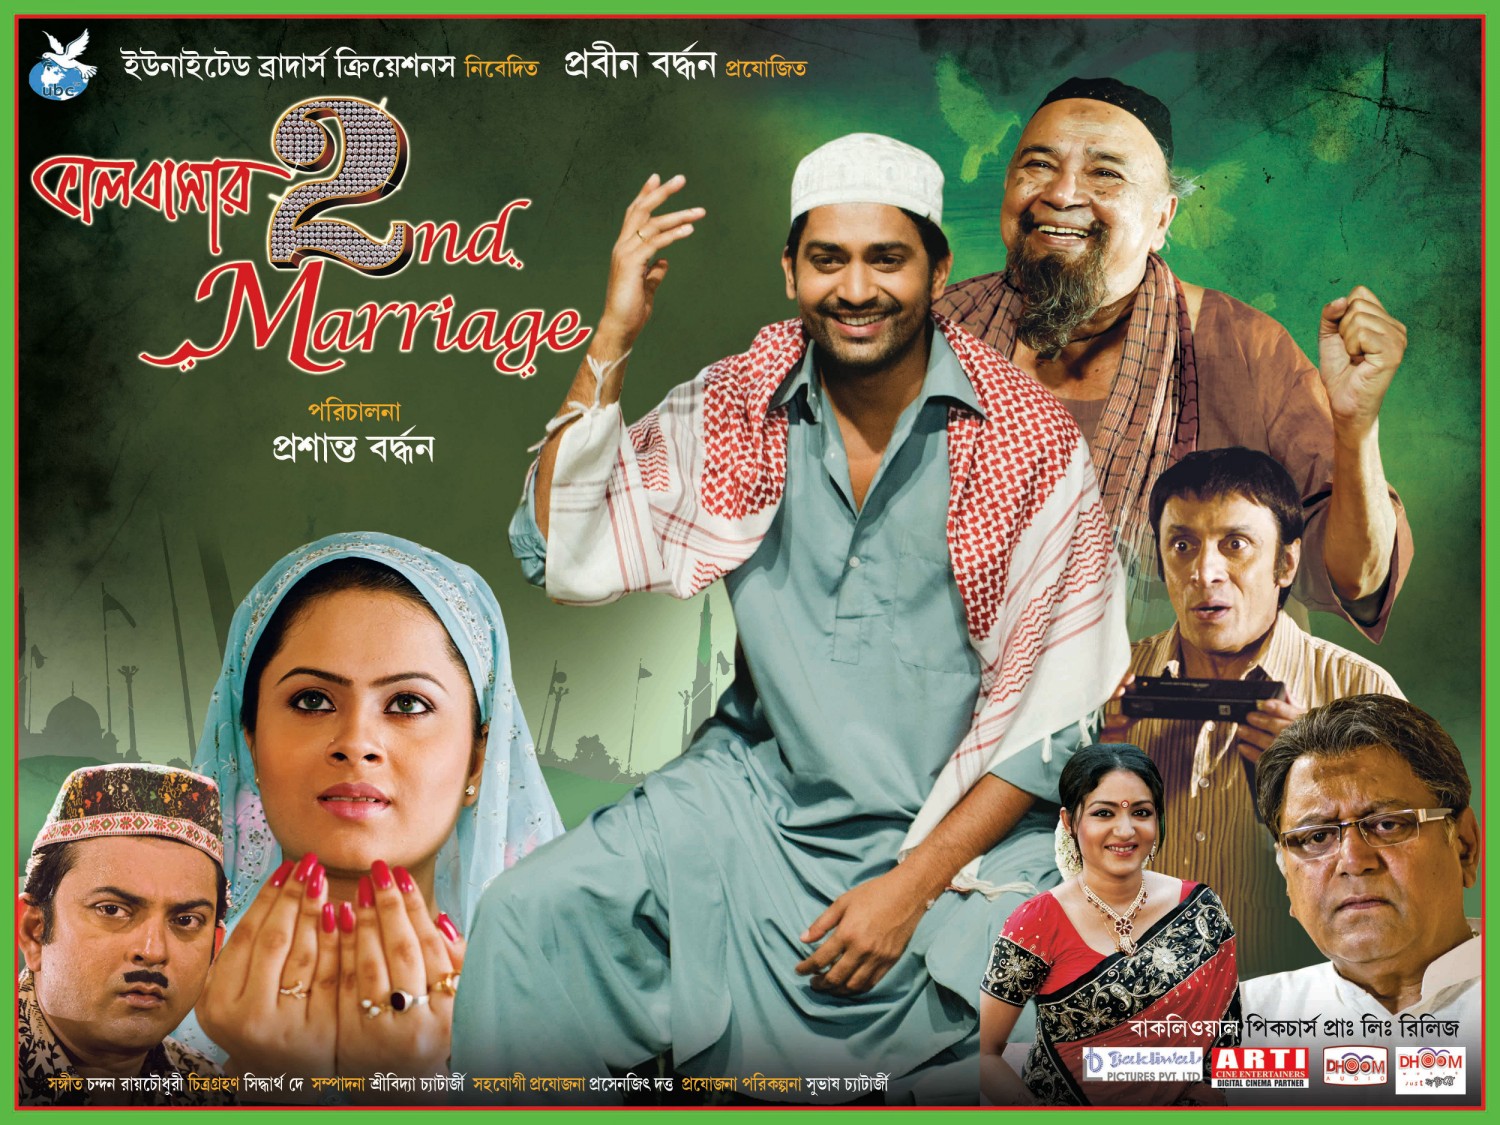 Extra Large Movie Poster Image for Bhalobasar 2nd Marriage (#6 of 6)